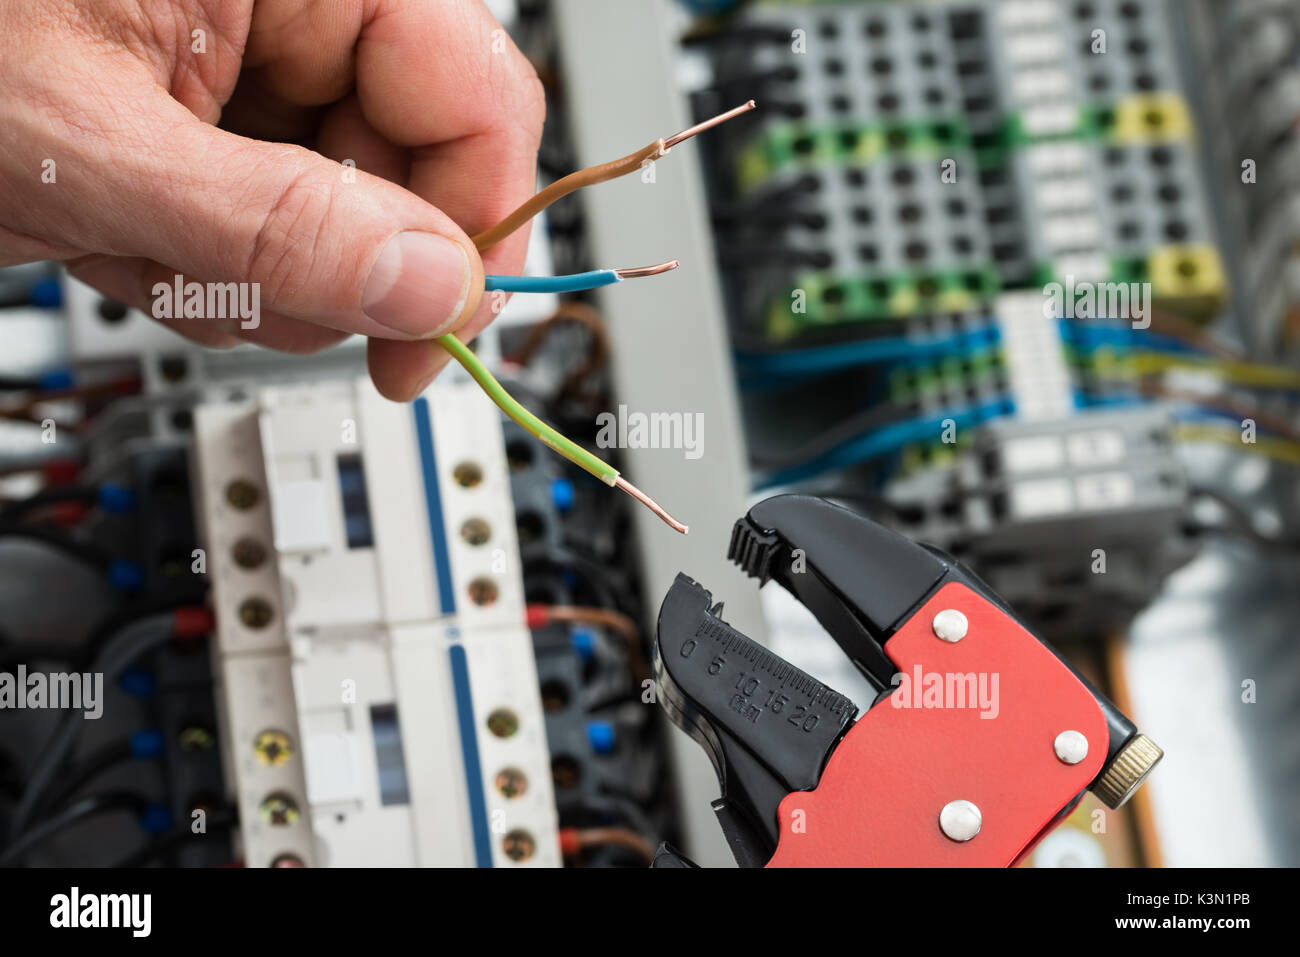 Close-up Of A Technician Holding Cables And Work Tool Stock Photo